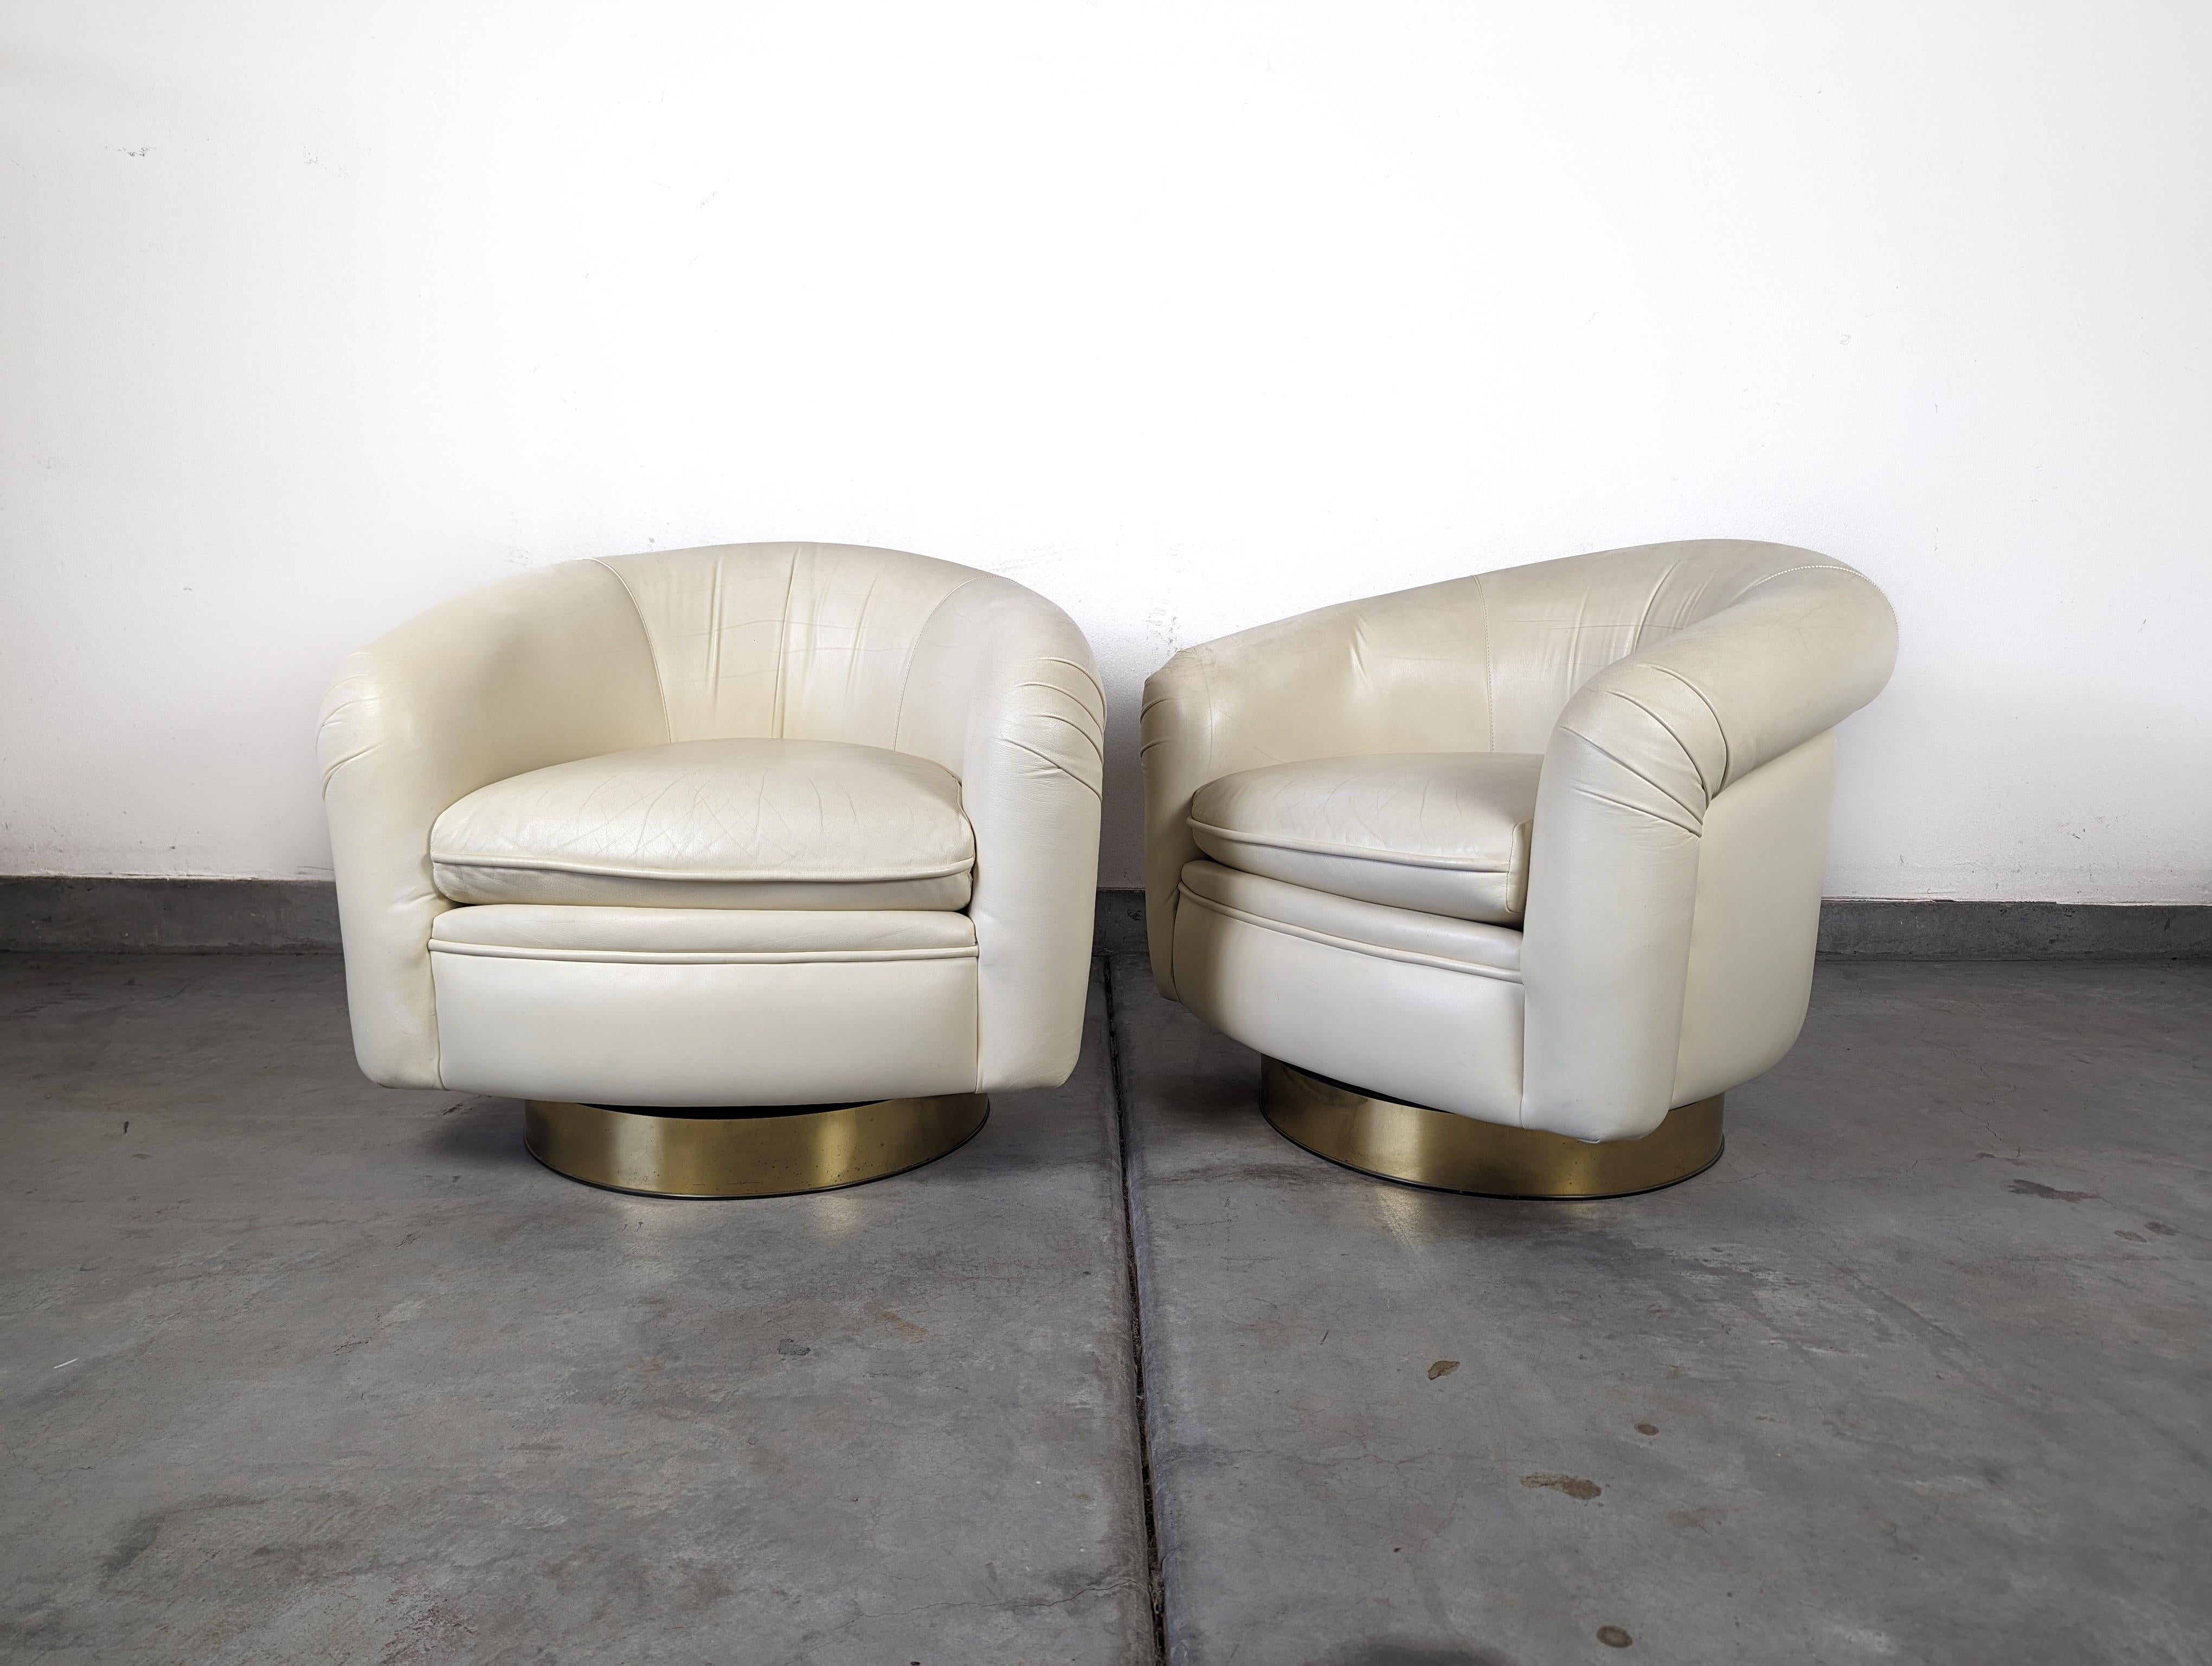 Leather Tilt Swivel Lounge Chairs by Milo Baughman for Thayer Coggin, c1970s For Sale 2